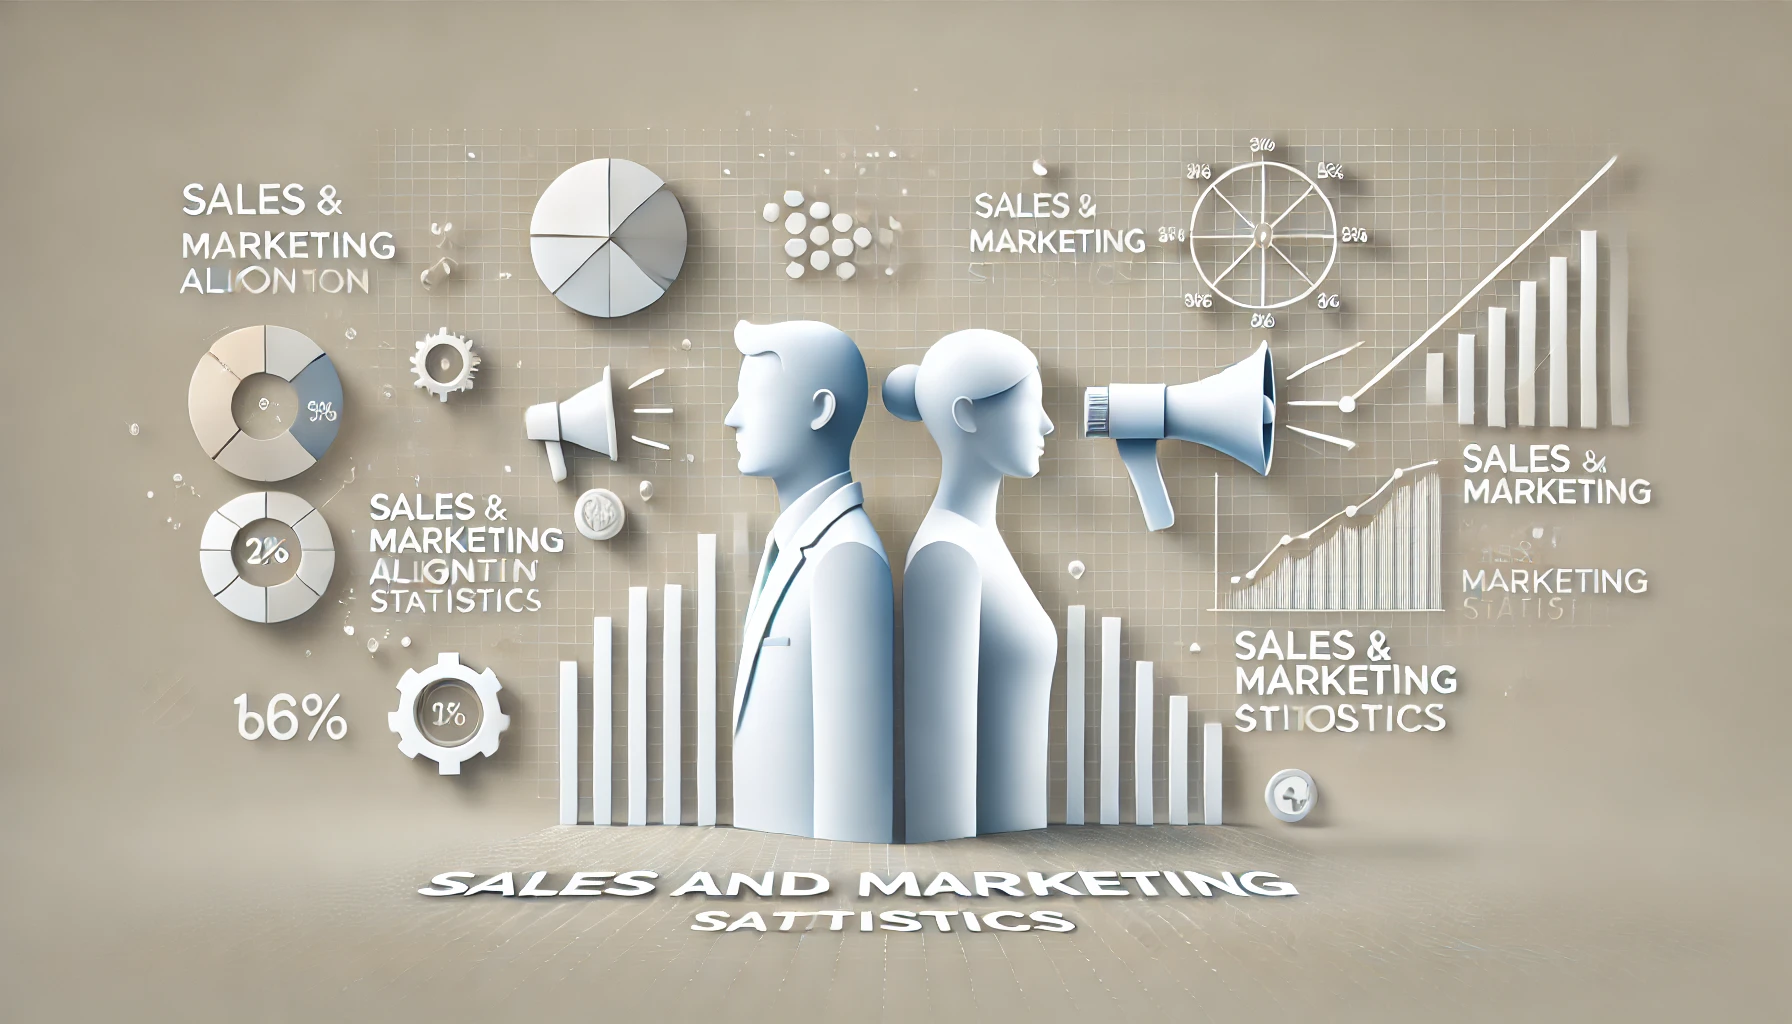 Sales and Marketing Alignment Statistics By Growth Rate, Benefits, Steps Taken to Align and Challenges